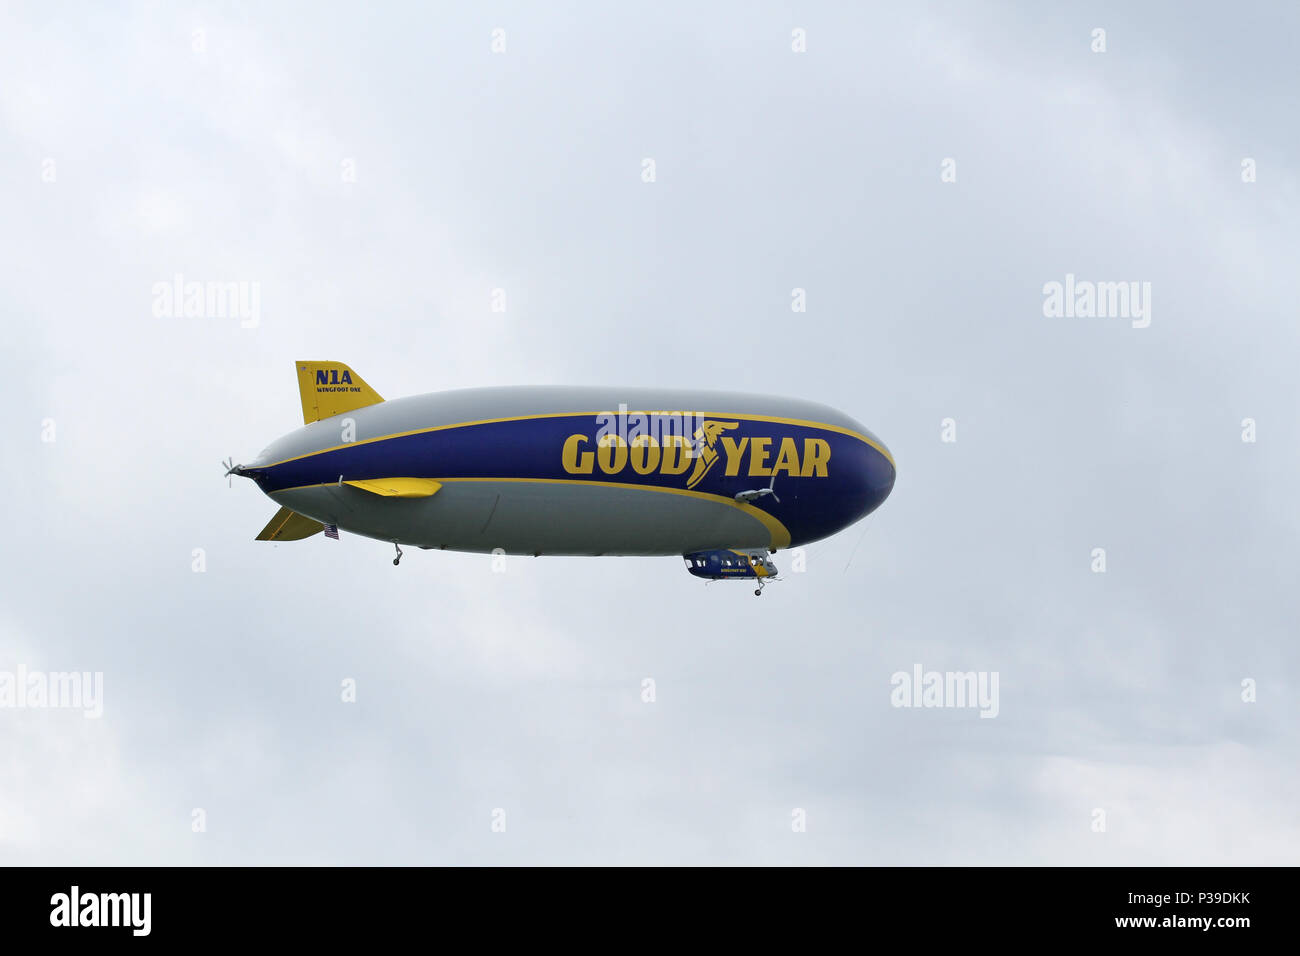 SUFFIELD, OHIO / USA – JUNE 16: The Goodyear blimp Wingfoot One on June 16, flying above Wingfoot Lake, Suffield, Ohio. This is at Blimp Base One Stock Photo